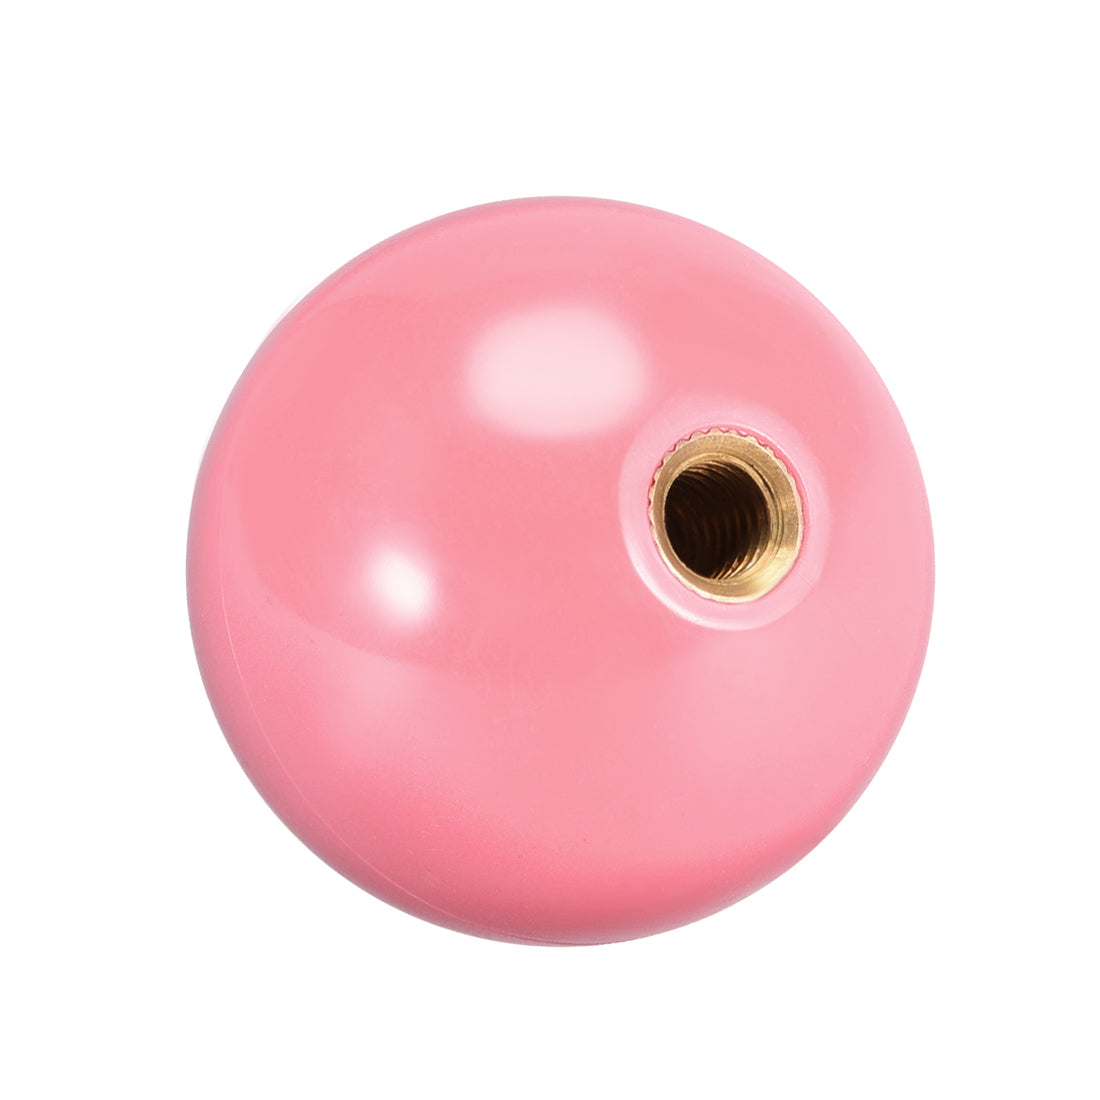 uxcell Uxcell Joystick Ball Top Handle Rocker Round Head Arcade Fighting Game DIY Parts Replacement Pink 2Pcs